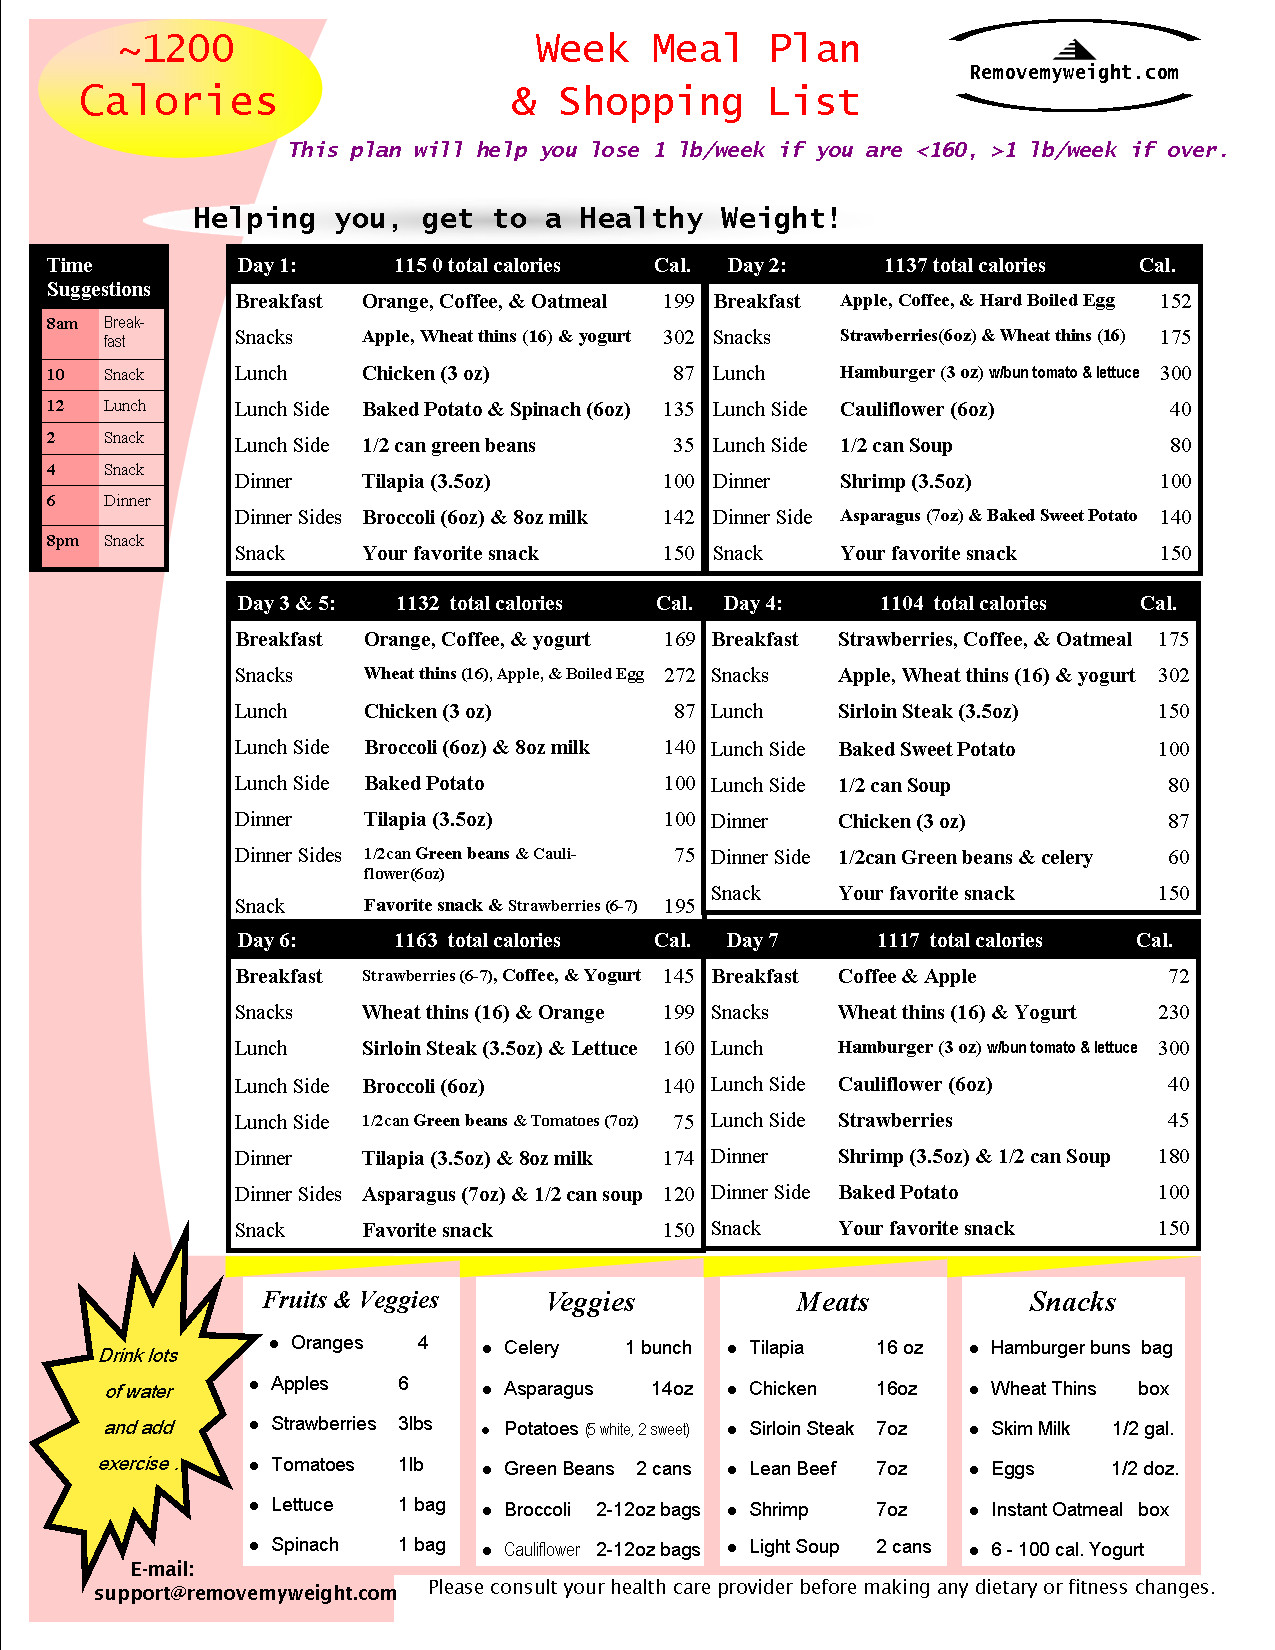 Low Calorie Diet Plan
 Updated 1200 Calories a Day to Lose Weight Printable Menu